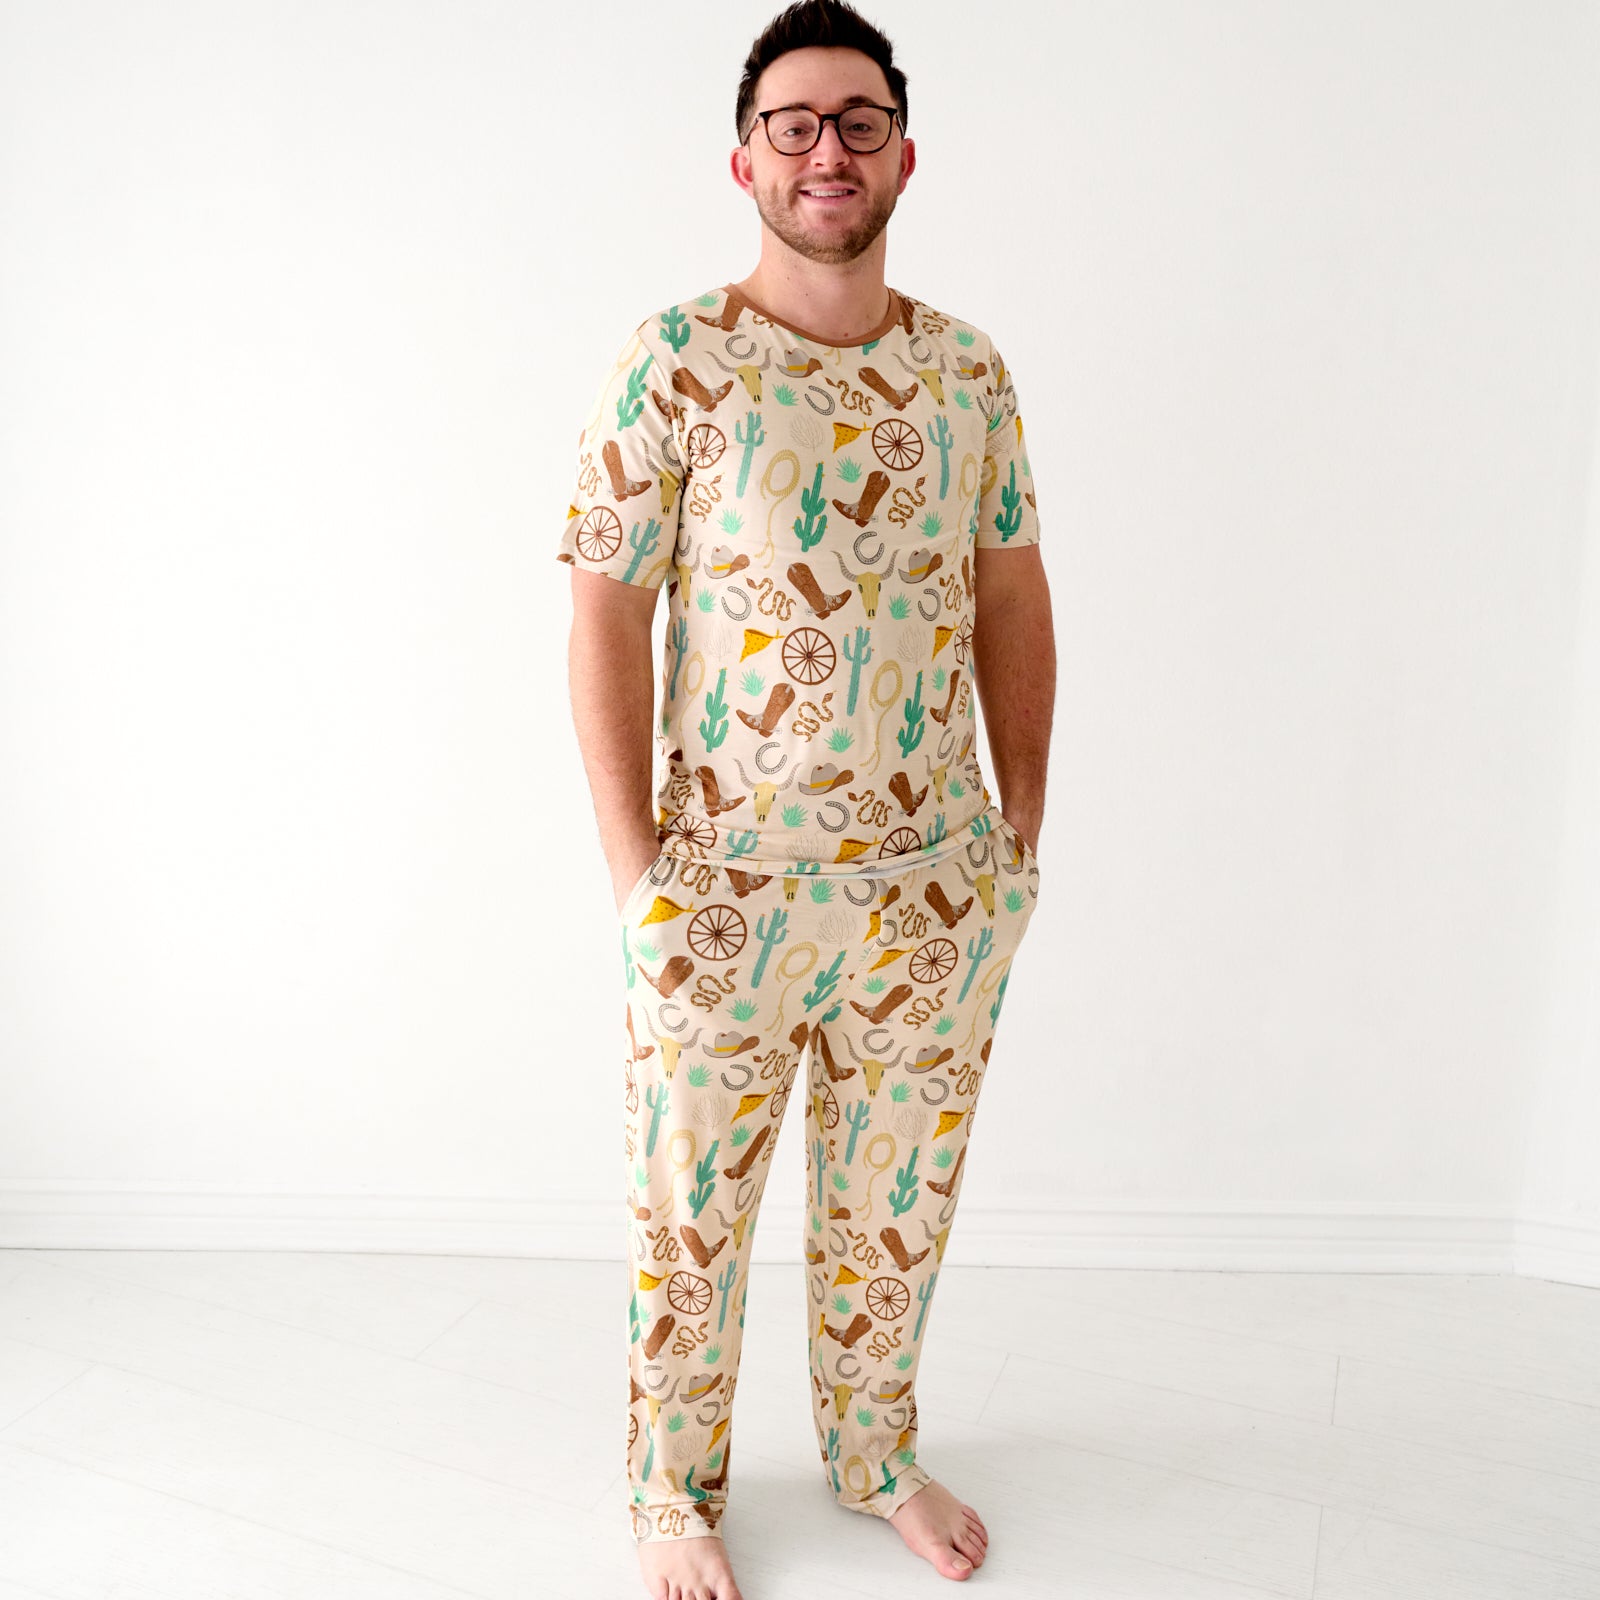 Image of a man wearing Caramel Ready to Rodeo men's pajama pants paired with a matching pajama top